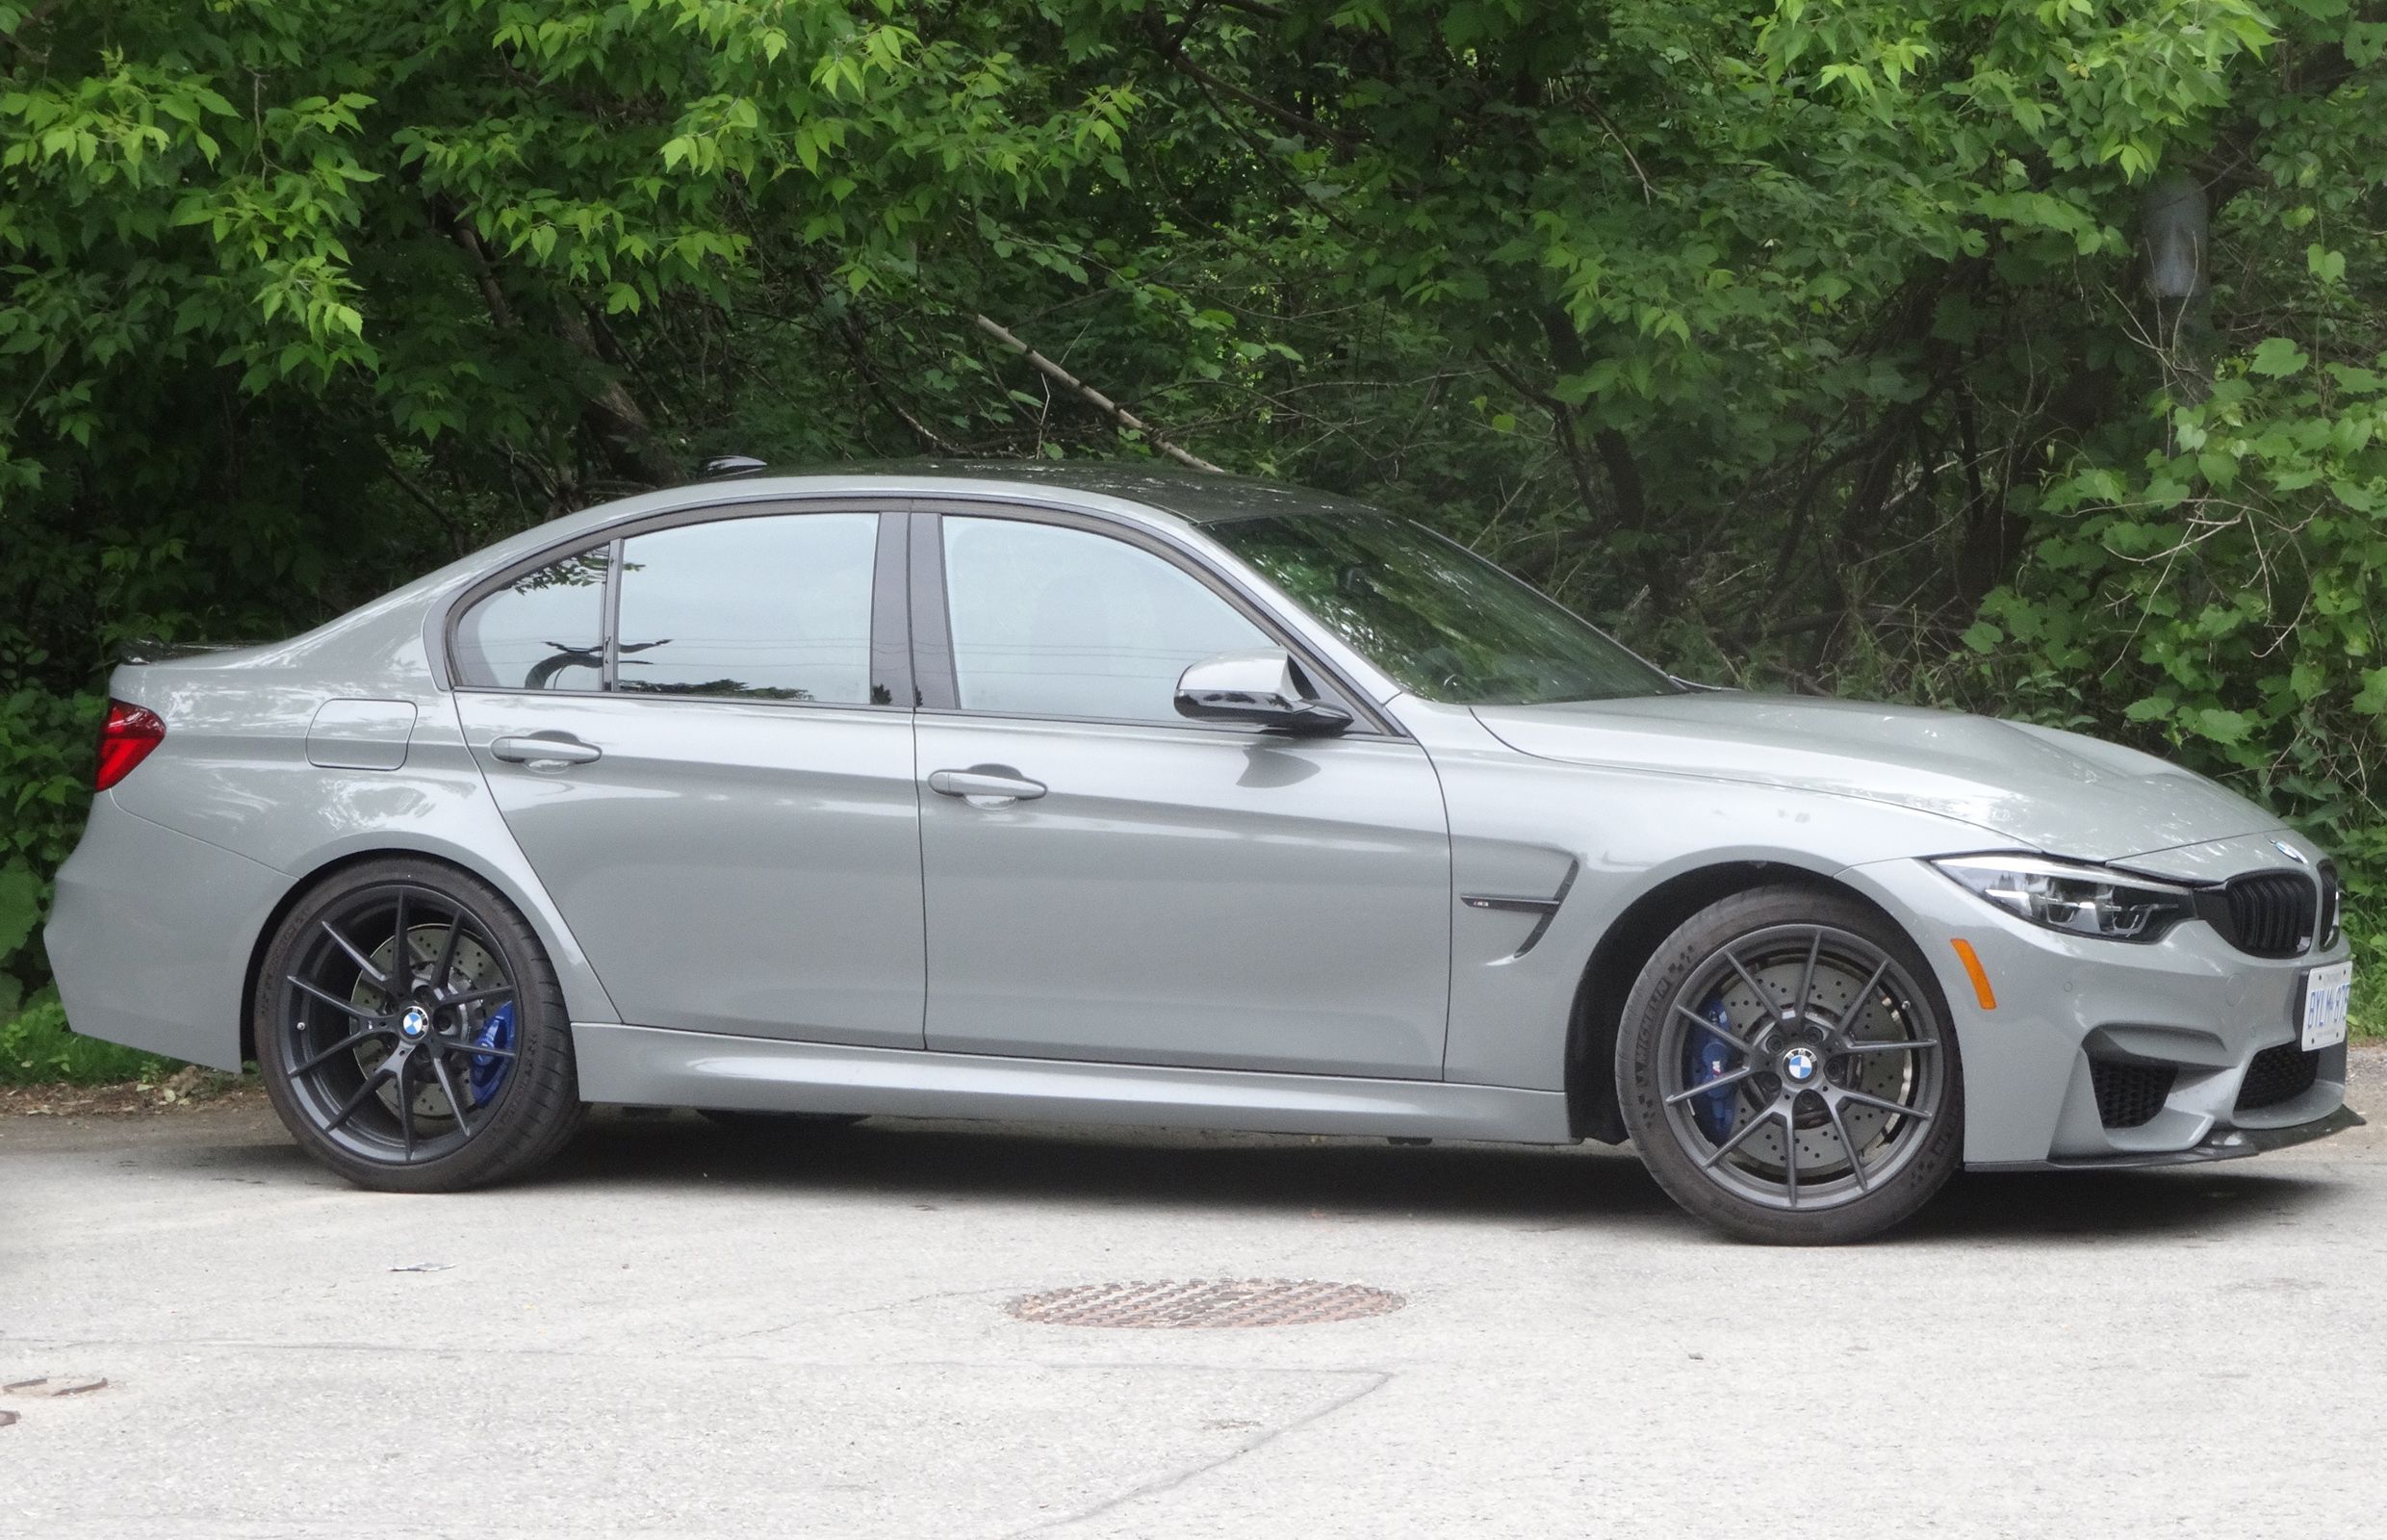 Ceramic wheel coating 2022 - recommended brands? - BMW M3 Forum